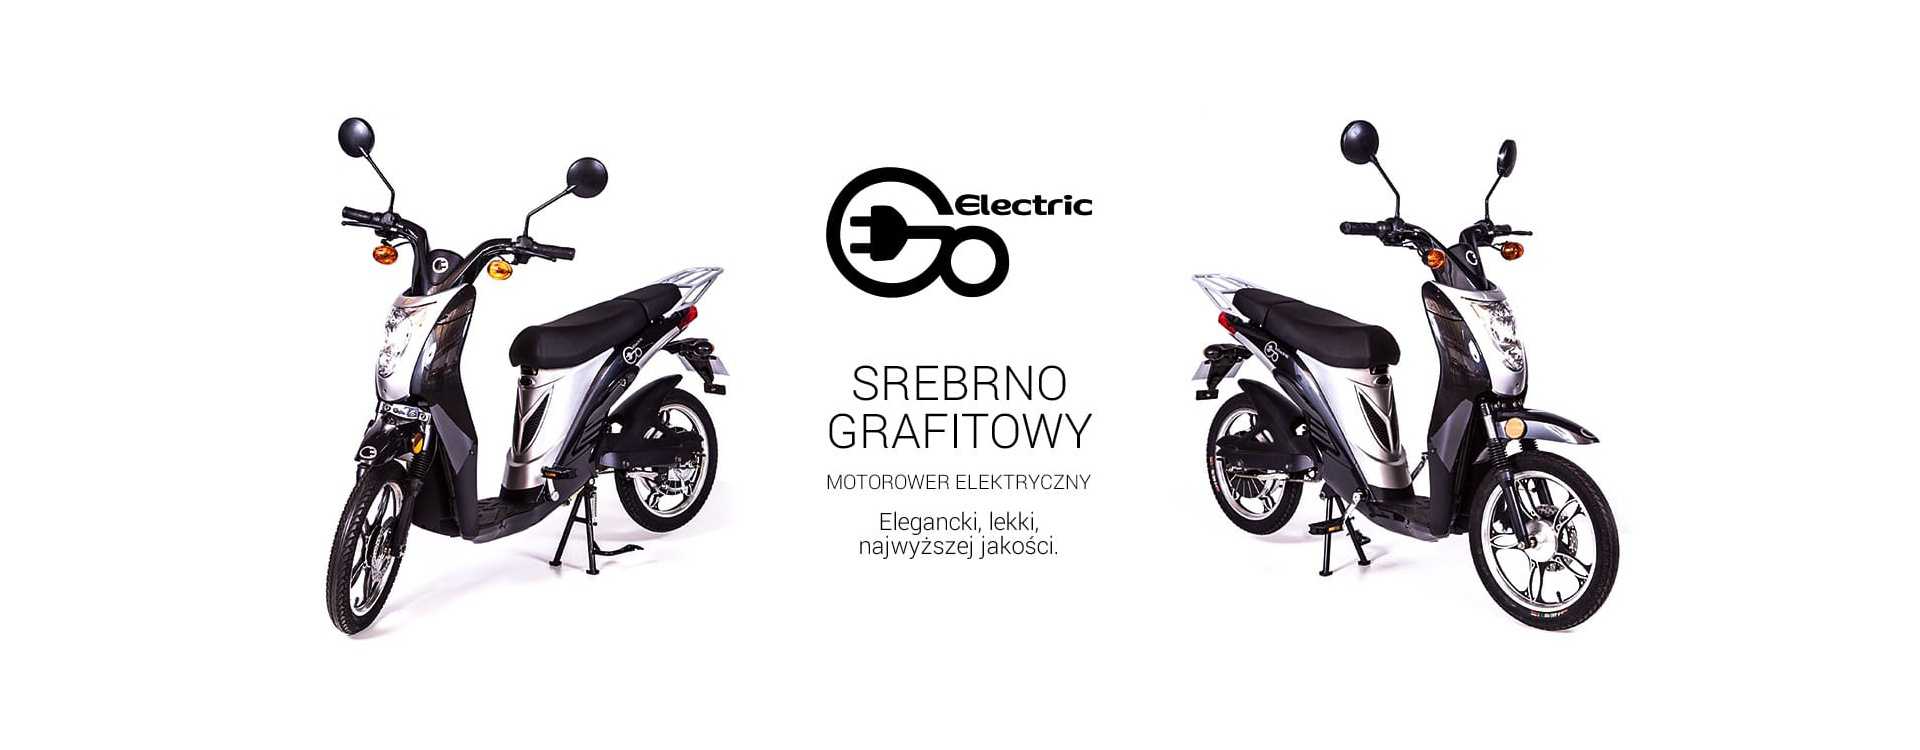 Electric Moped Lightning